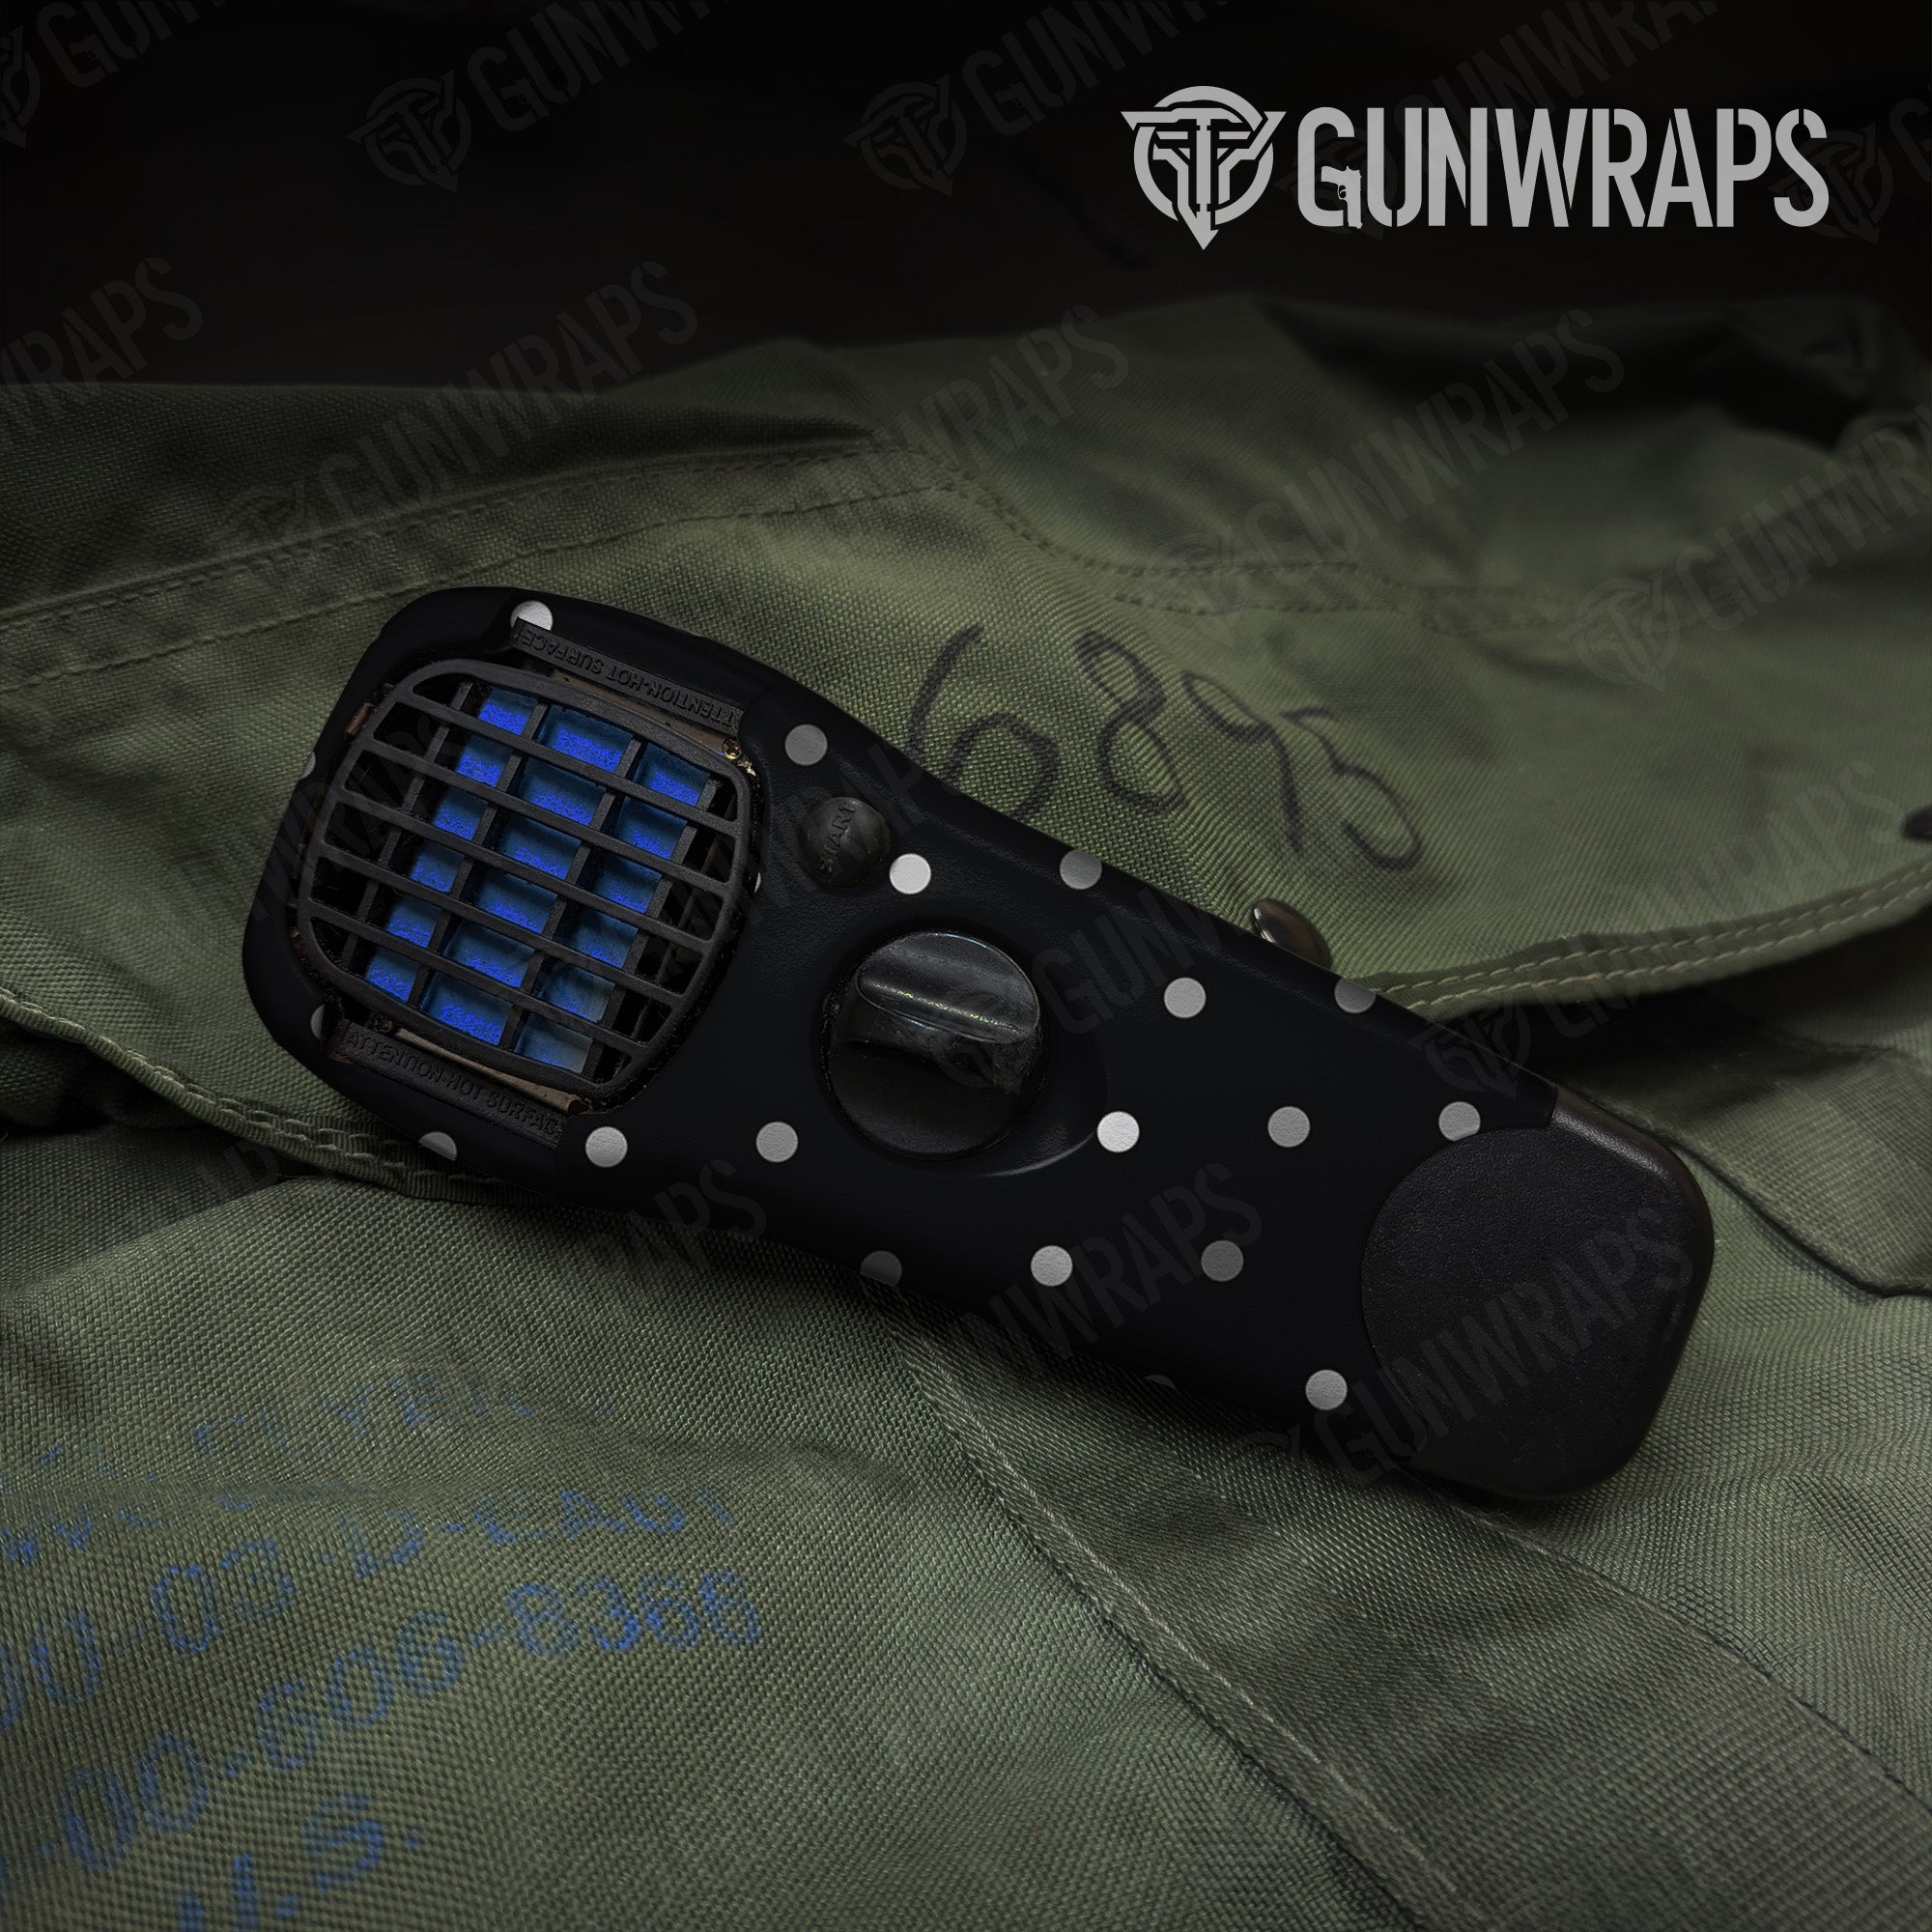 Thermacell Dotted Grayscale Gear Skin Pattern